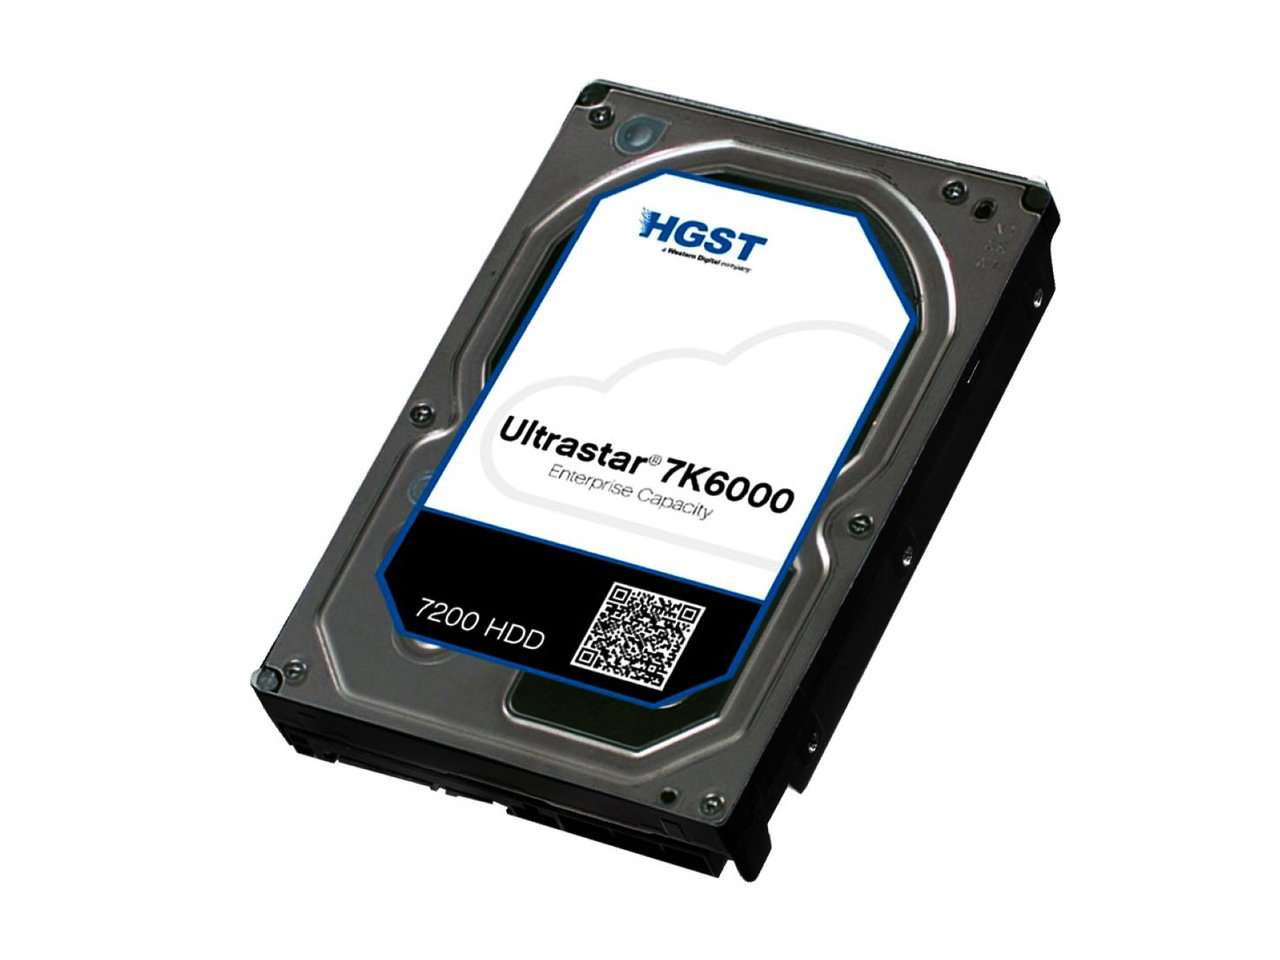 HGST Ultrastar 7K6000 0F22805  HUS726040AL5211 4TB 7.2K RPM SAS 12Gb/s 512e 128MB Cache 3.5" TCG Manufacturer Recertified HDD